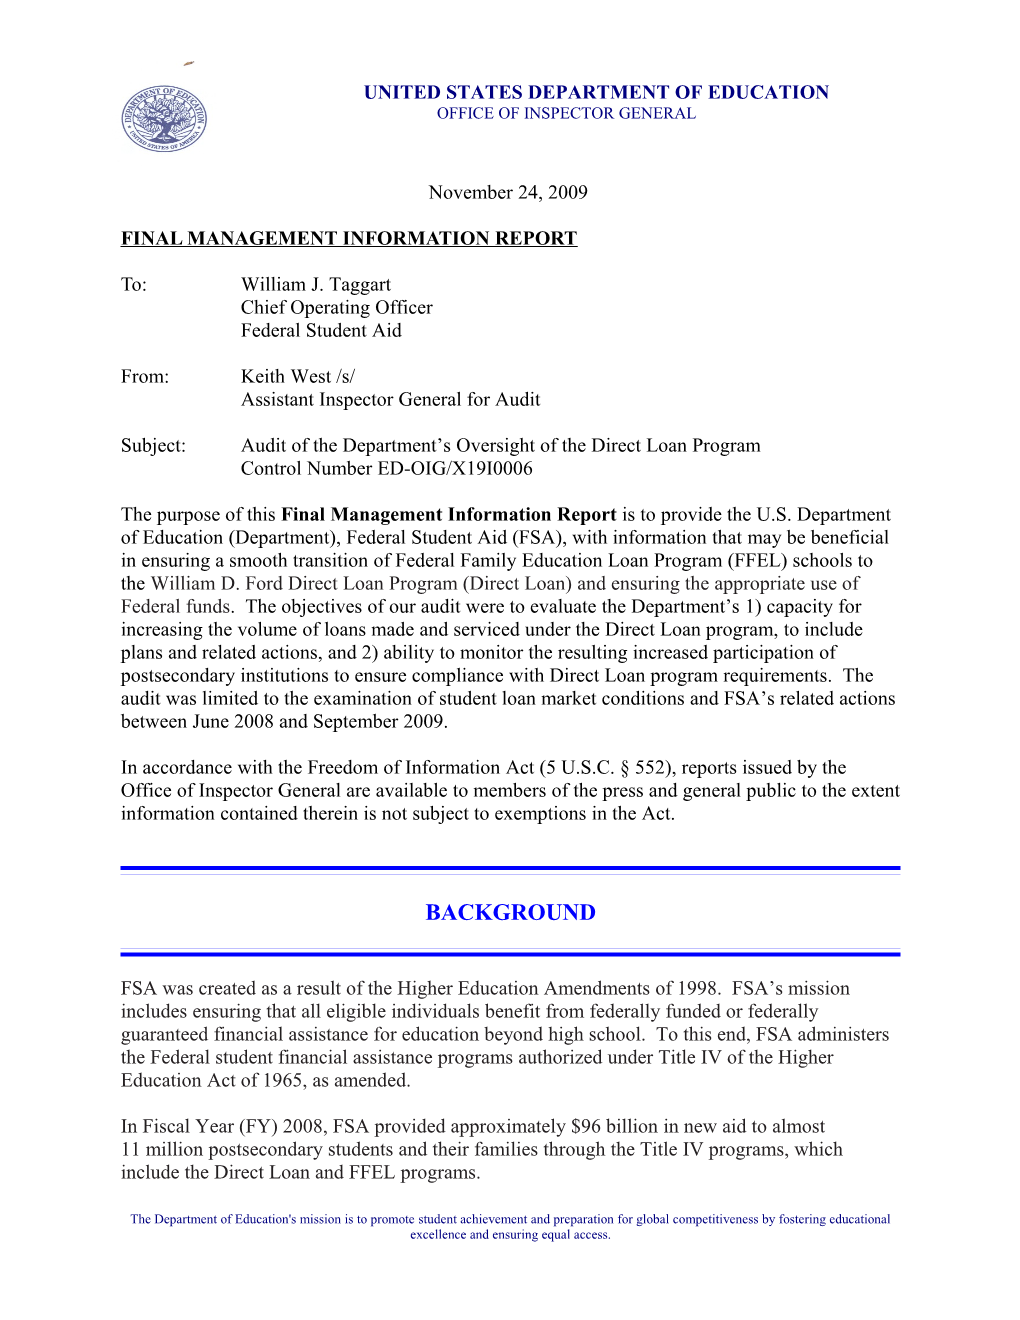 The Department S Oversight of the Direct Loan Program (MS Word)